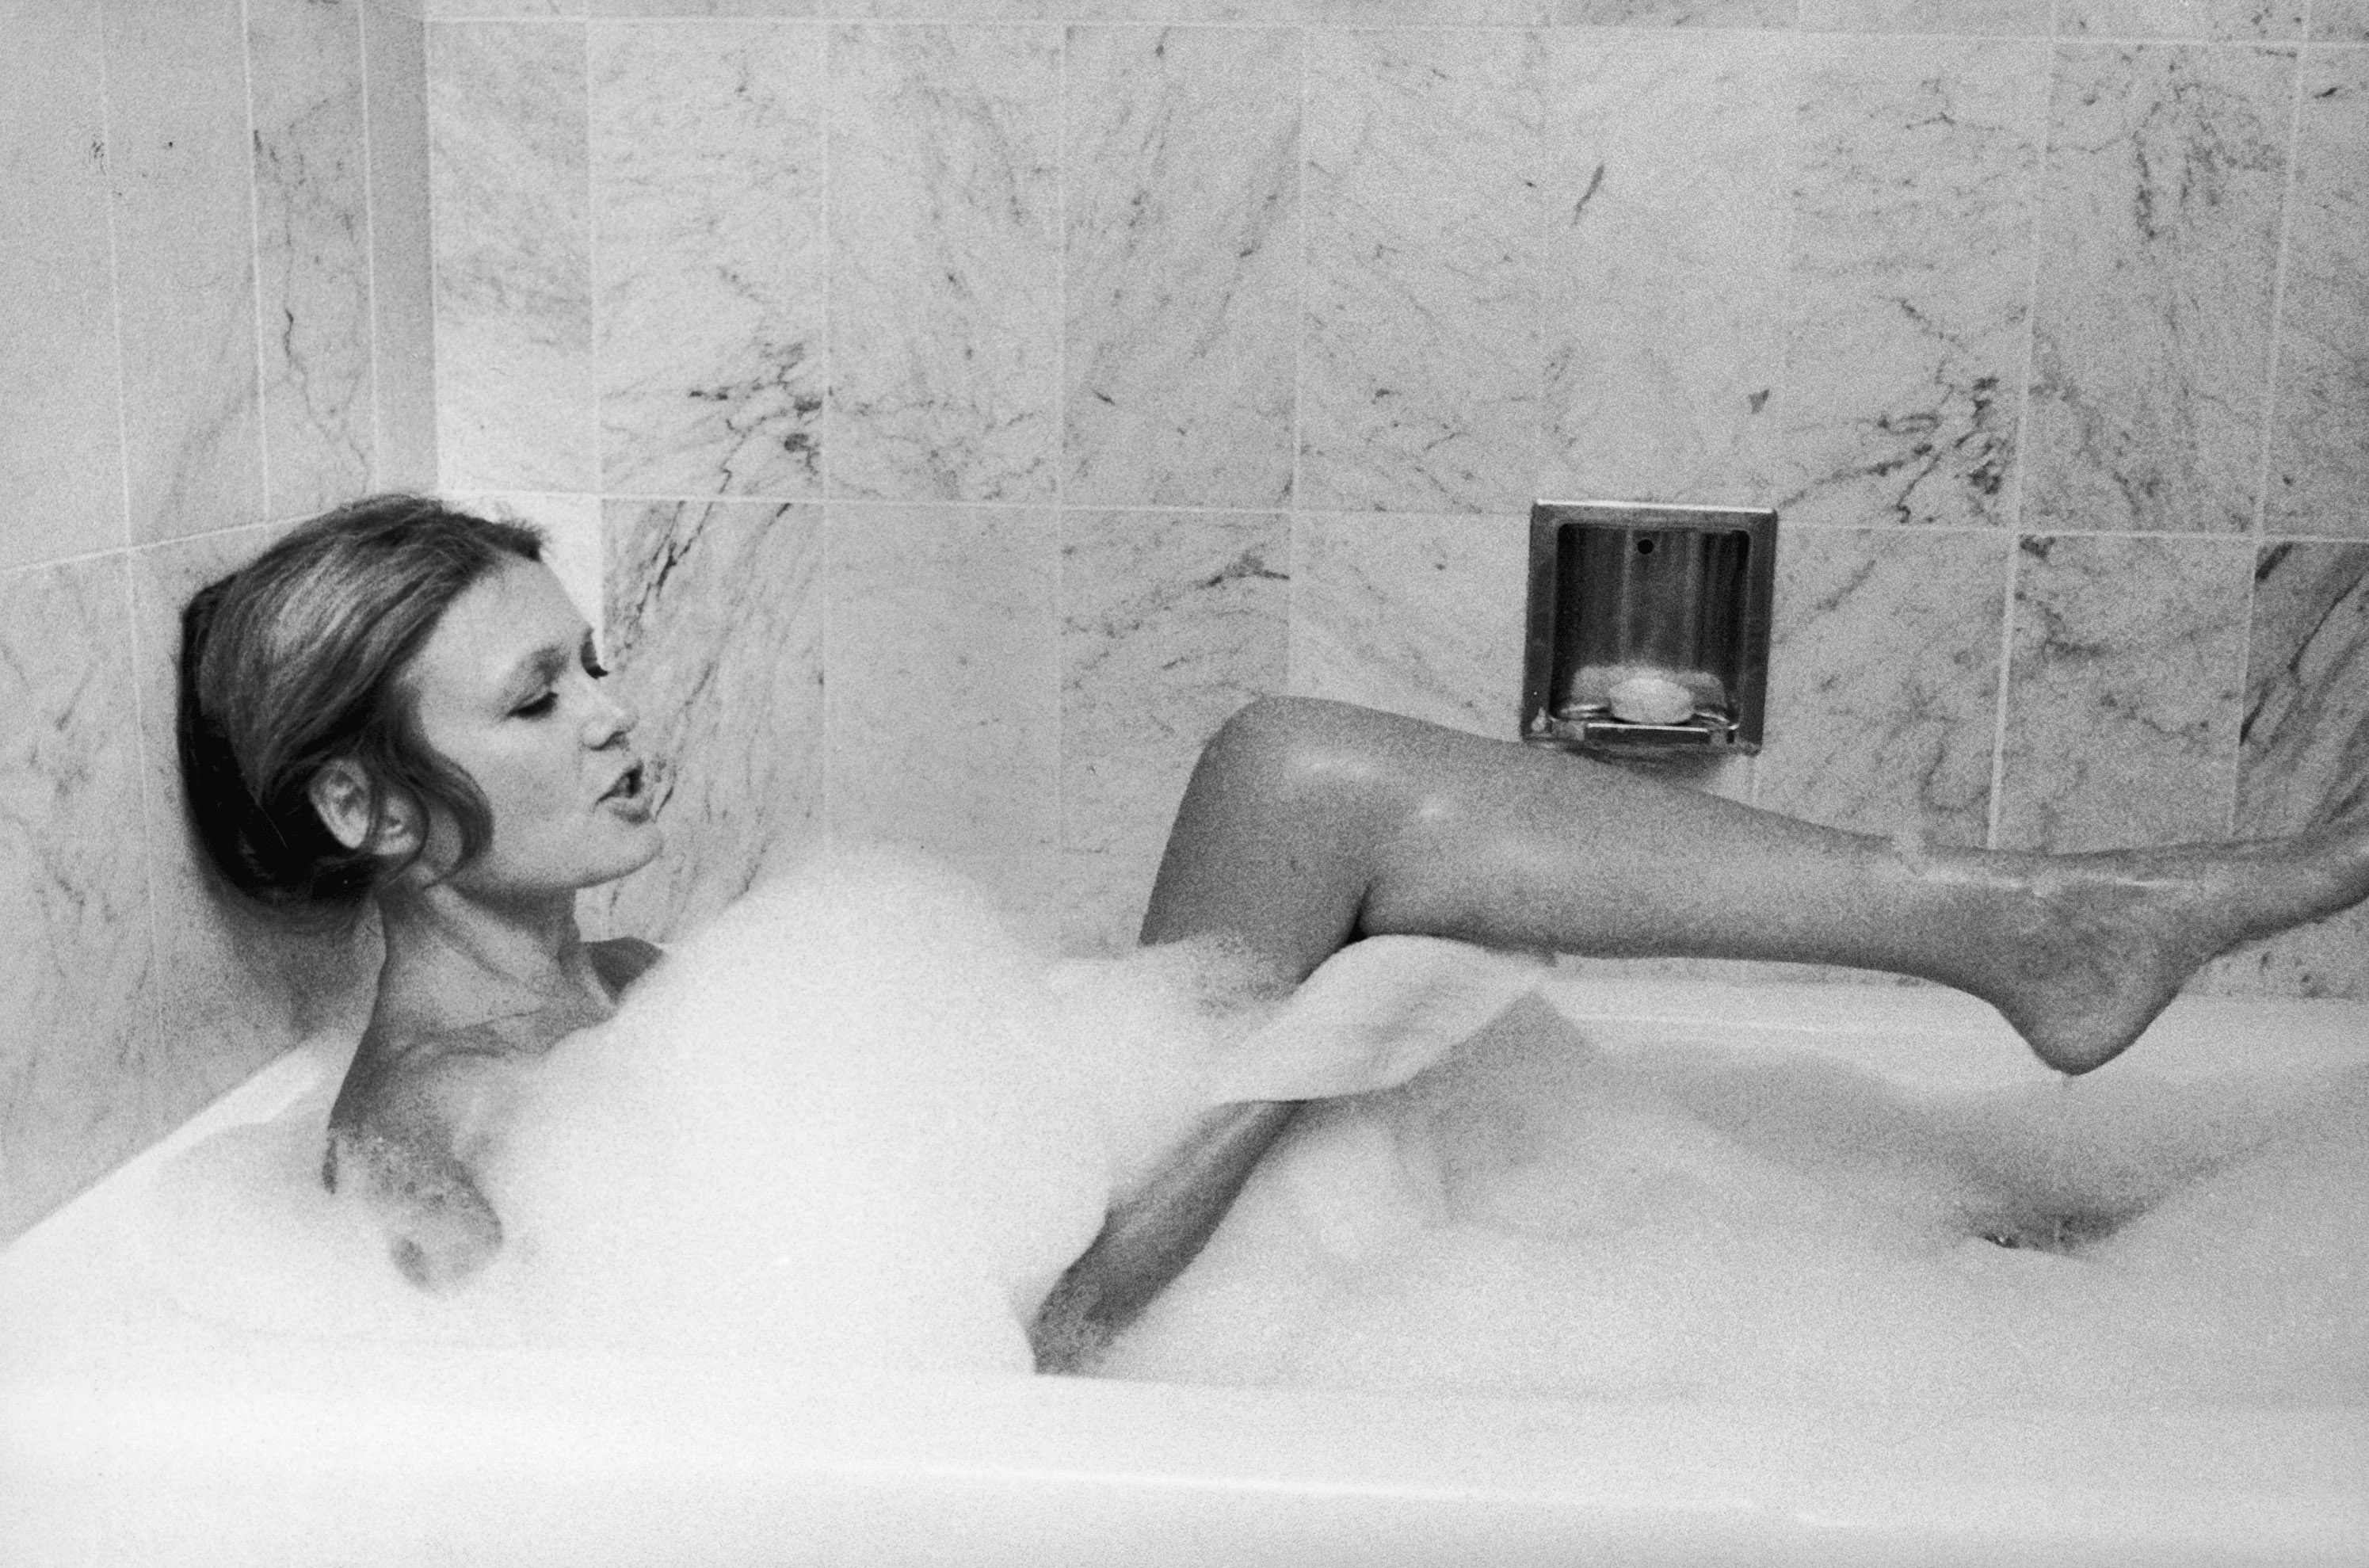 Feminist journalist and author Gloria Steinem baring one leg as she relaxes in a luxurious bubble bath at home. (Marianne Barcellona—Time & Life Pictures/Getty Image)